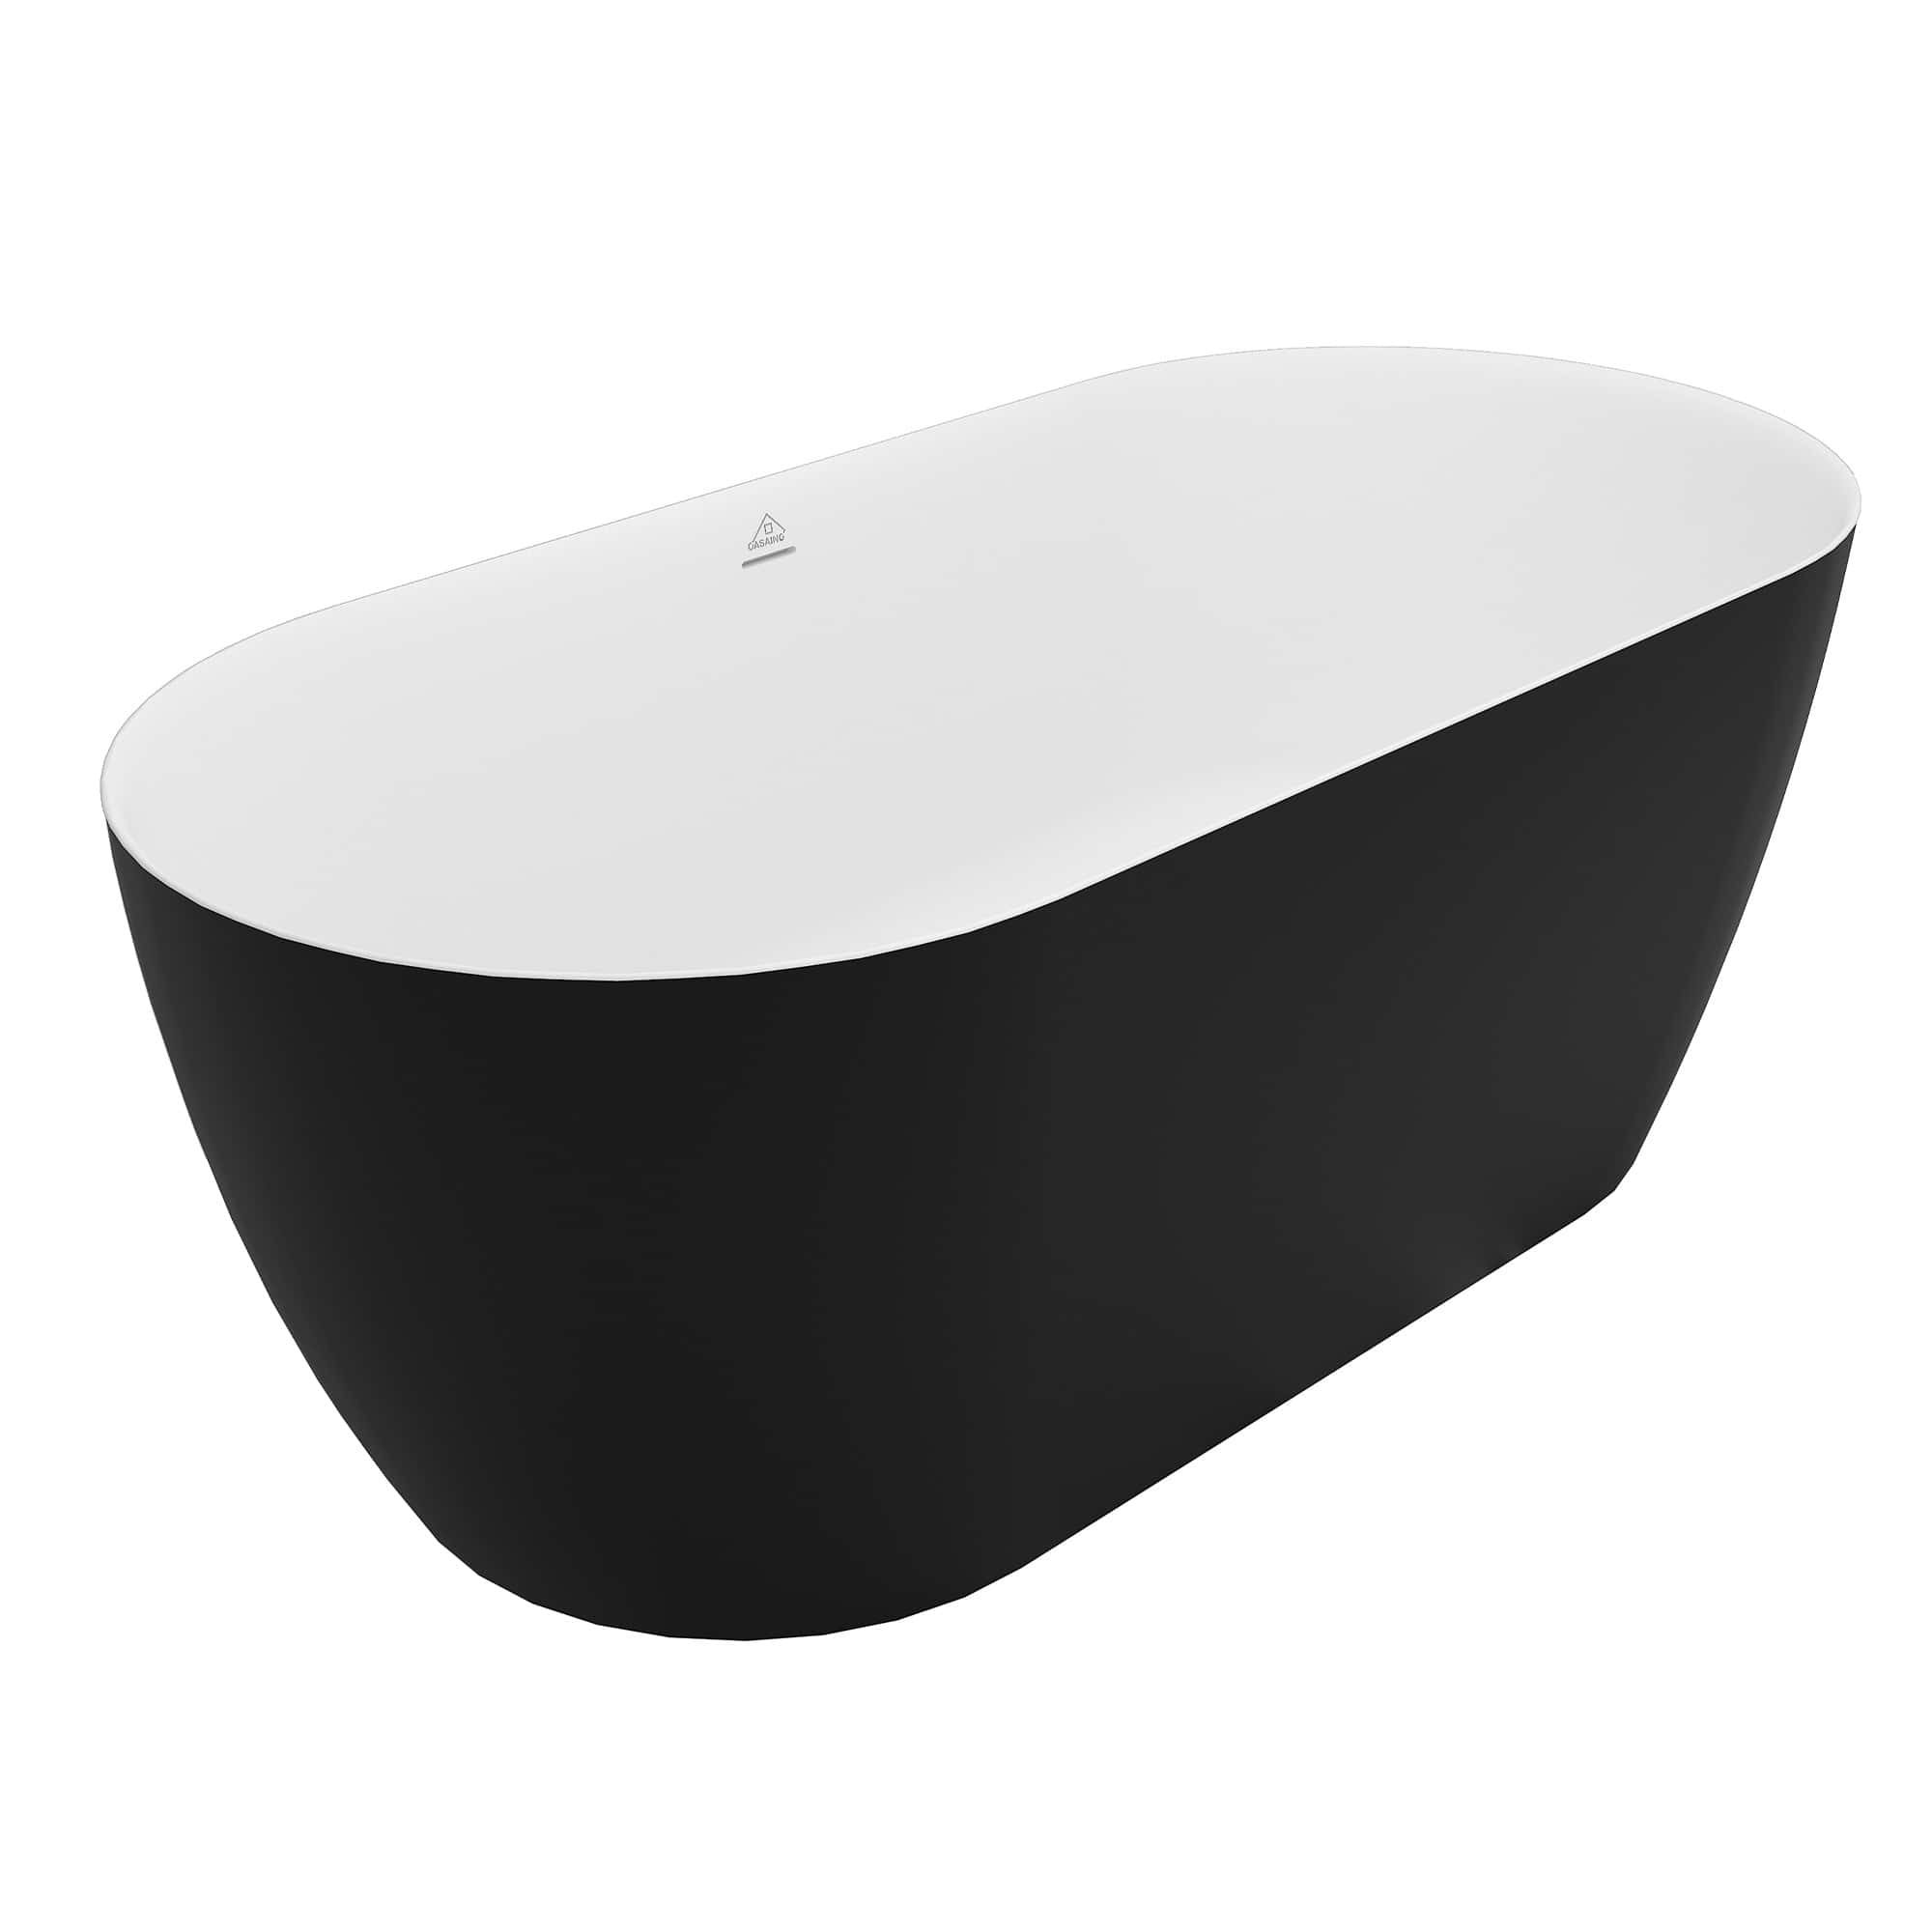  59/67 Inch Matte Black Outside and White Inside Freestanding Solid Surface Soaking Tub